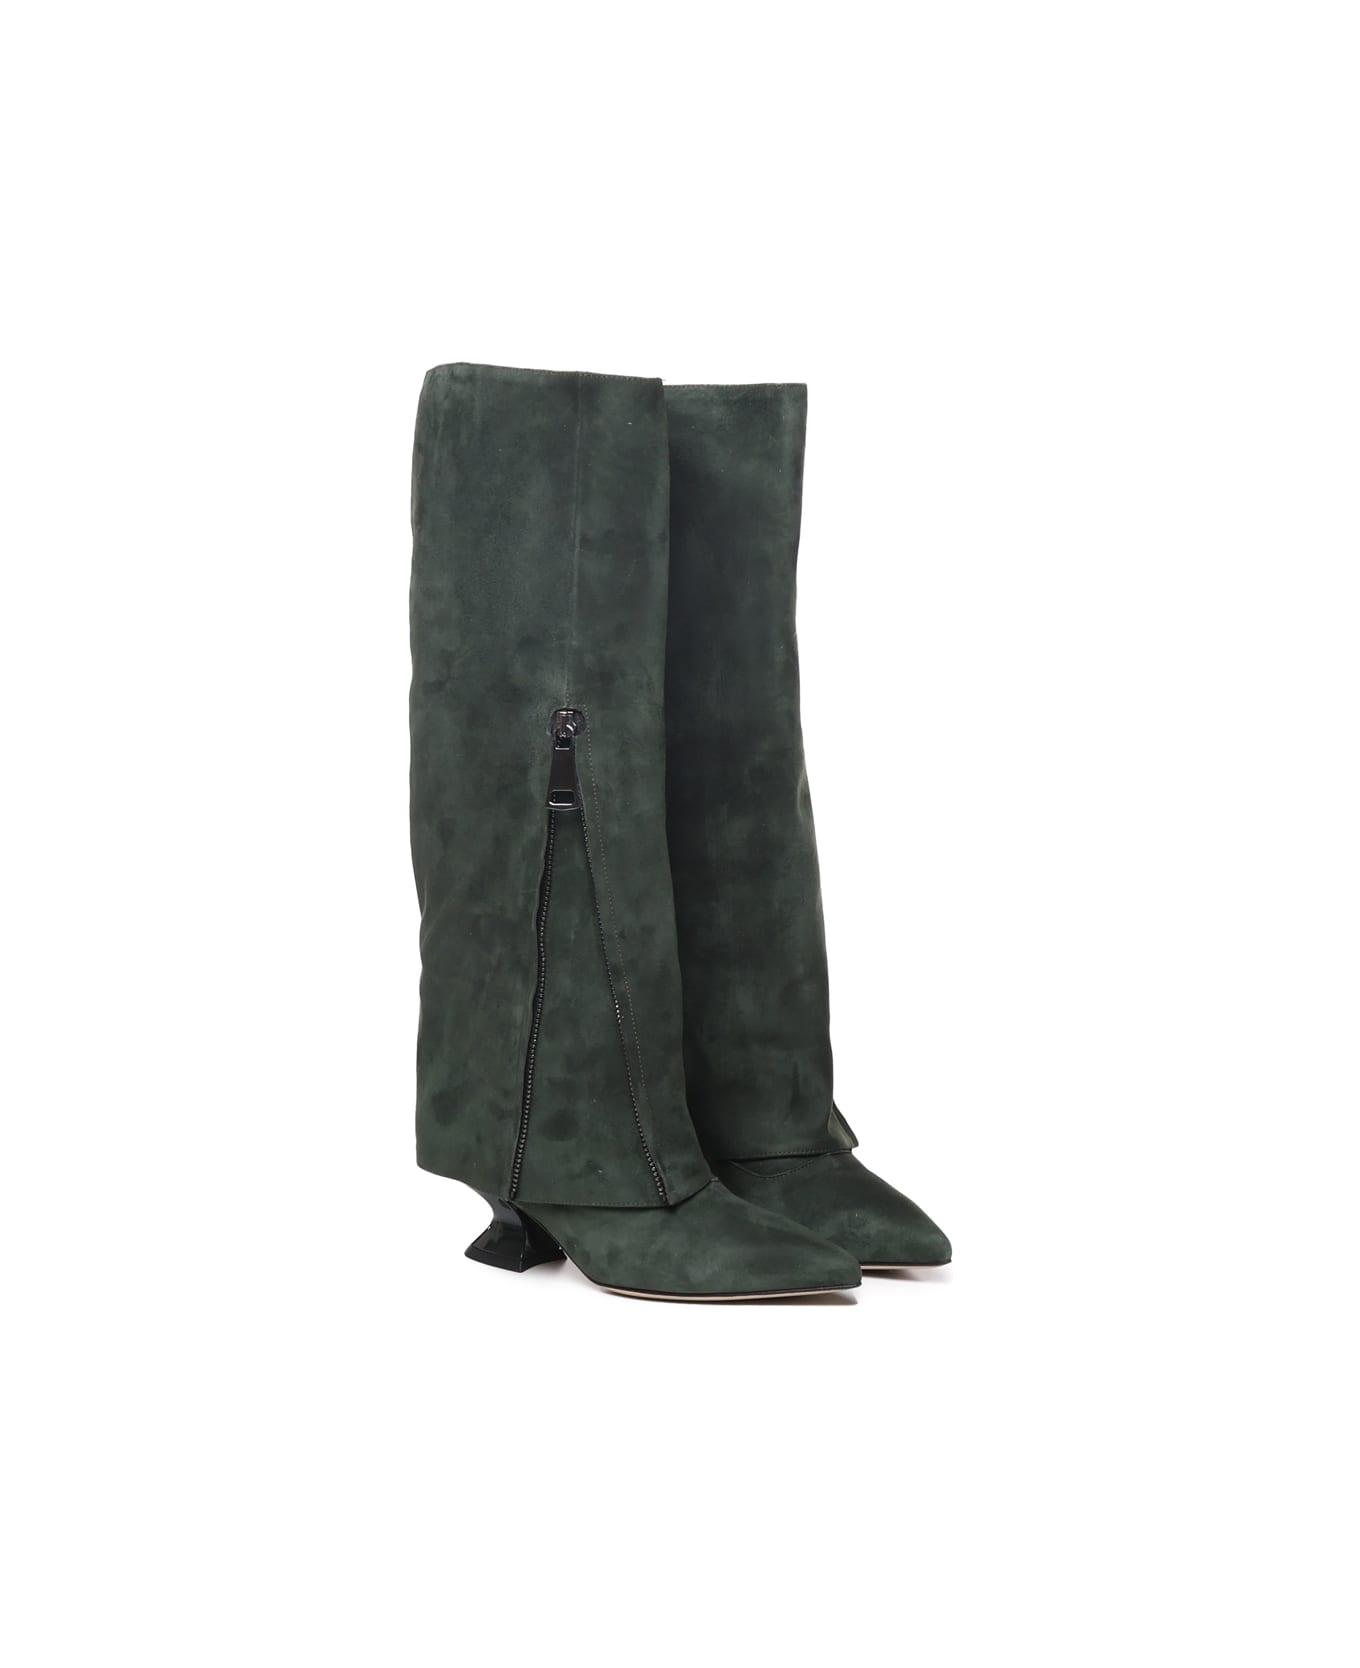 Alchimia Suede Boot With Heel - Green ブーツ